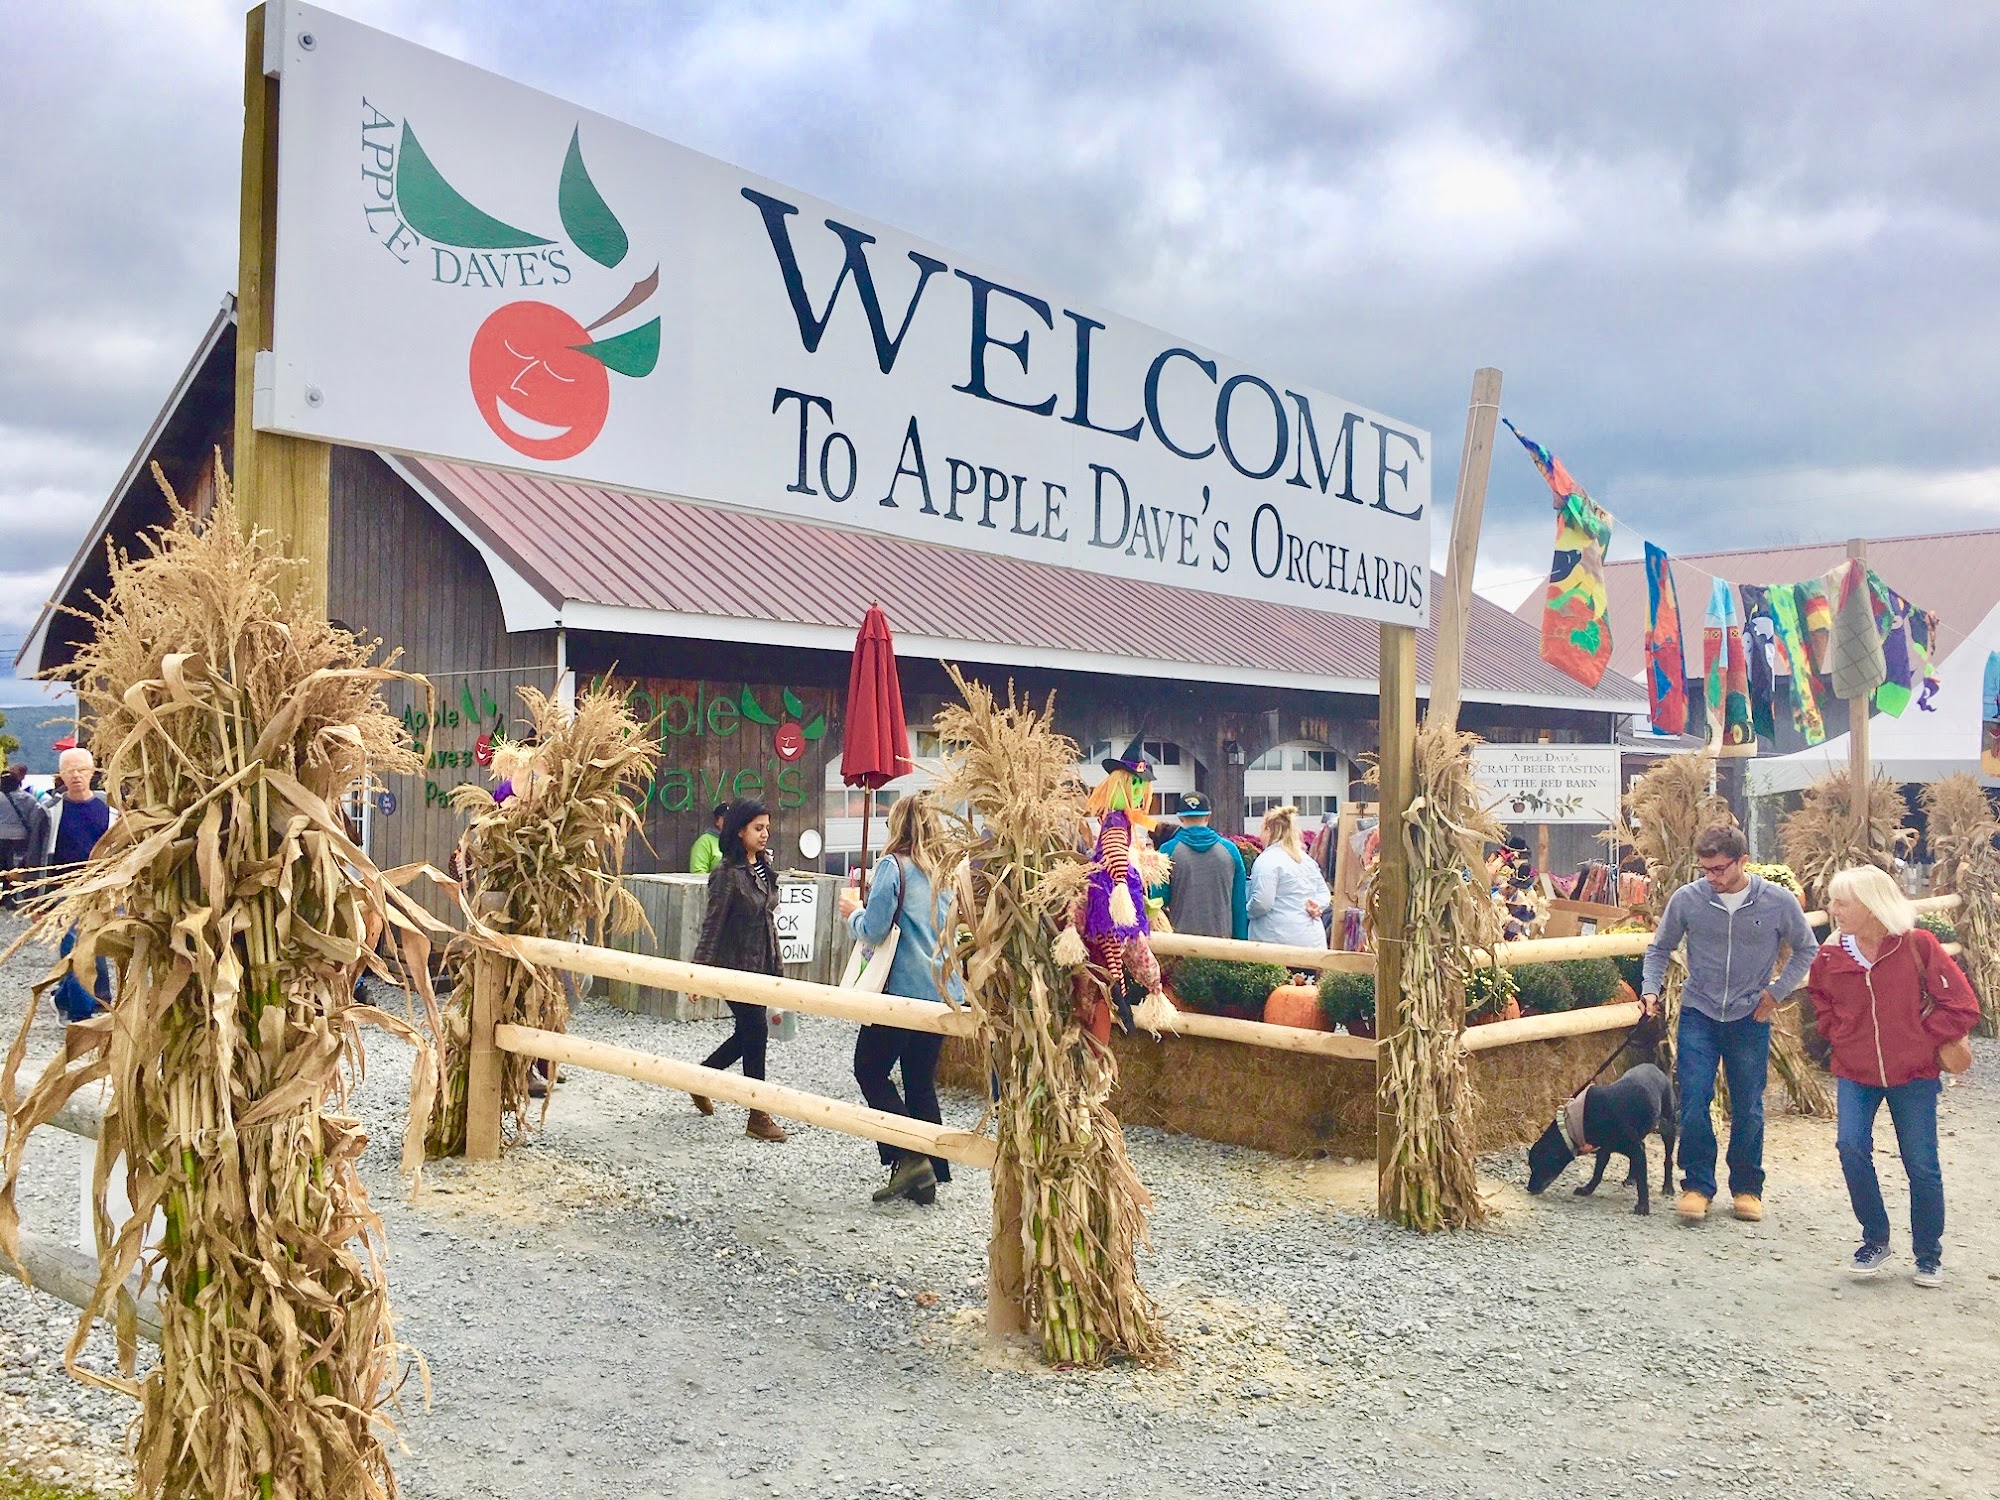 Apple Dave's Orchards